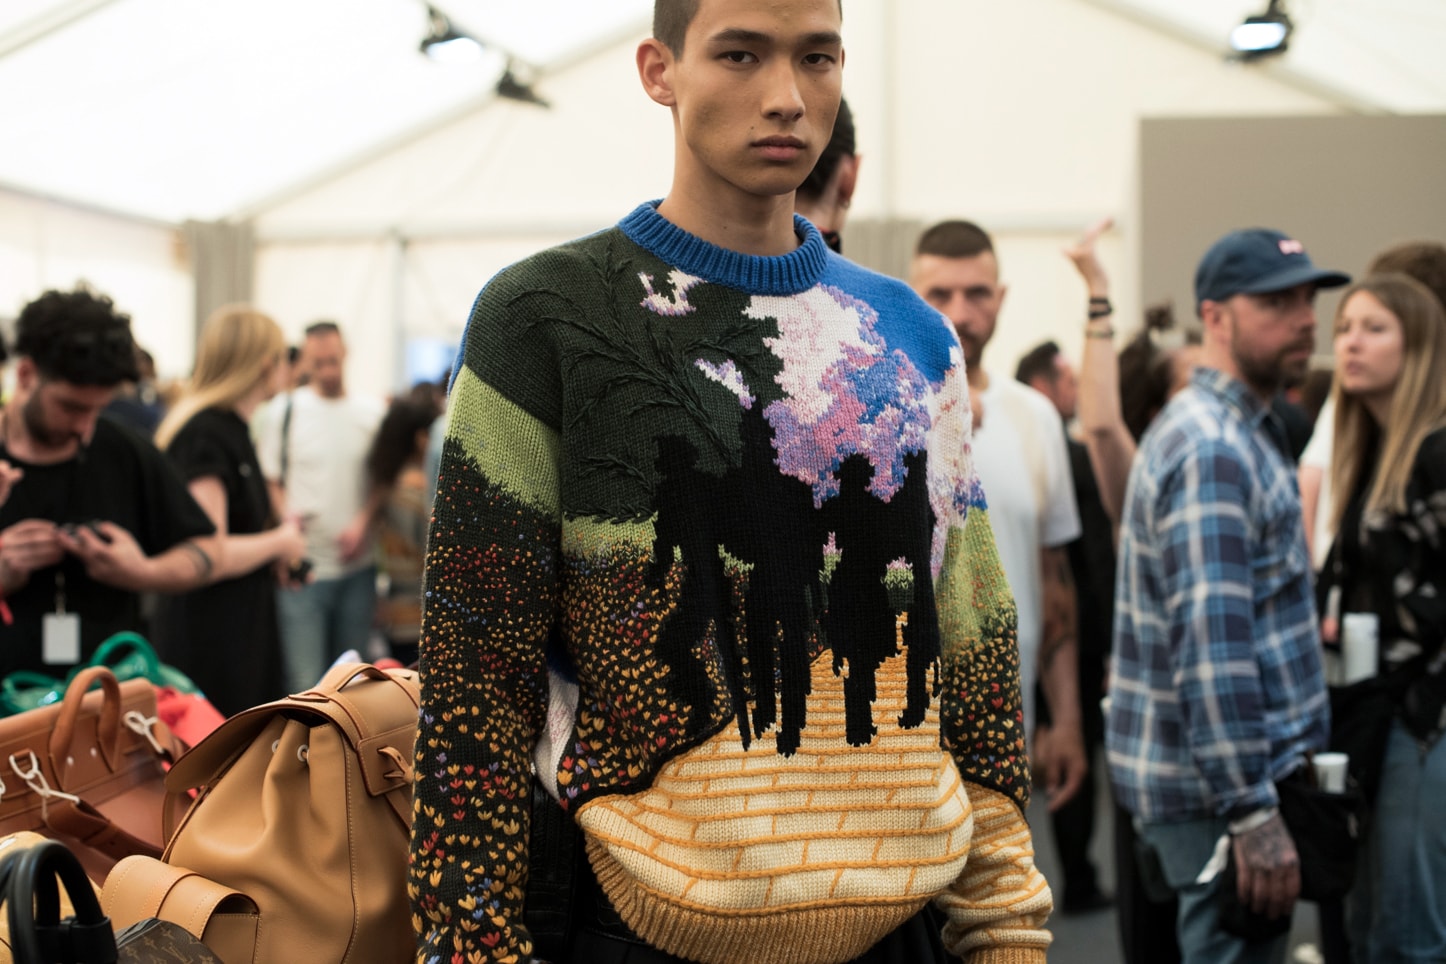 Louis vuitton spring summer 2019 backstage runway show collection virgil abloh debut premiere first accessories bags shirt tee coat fur